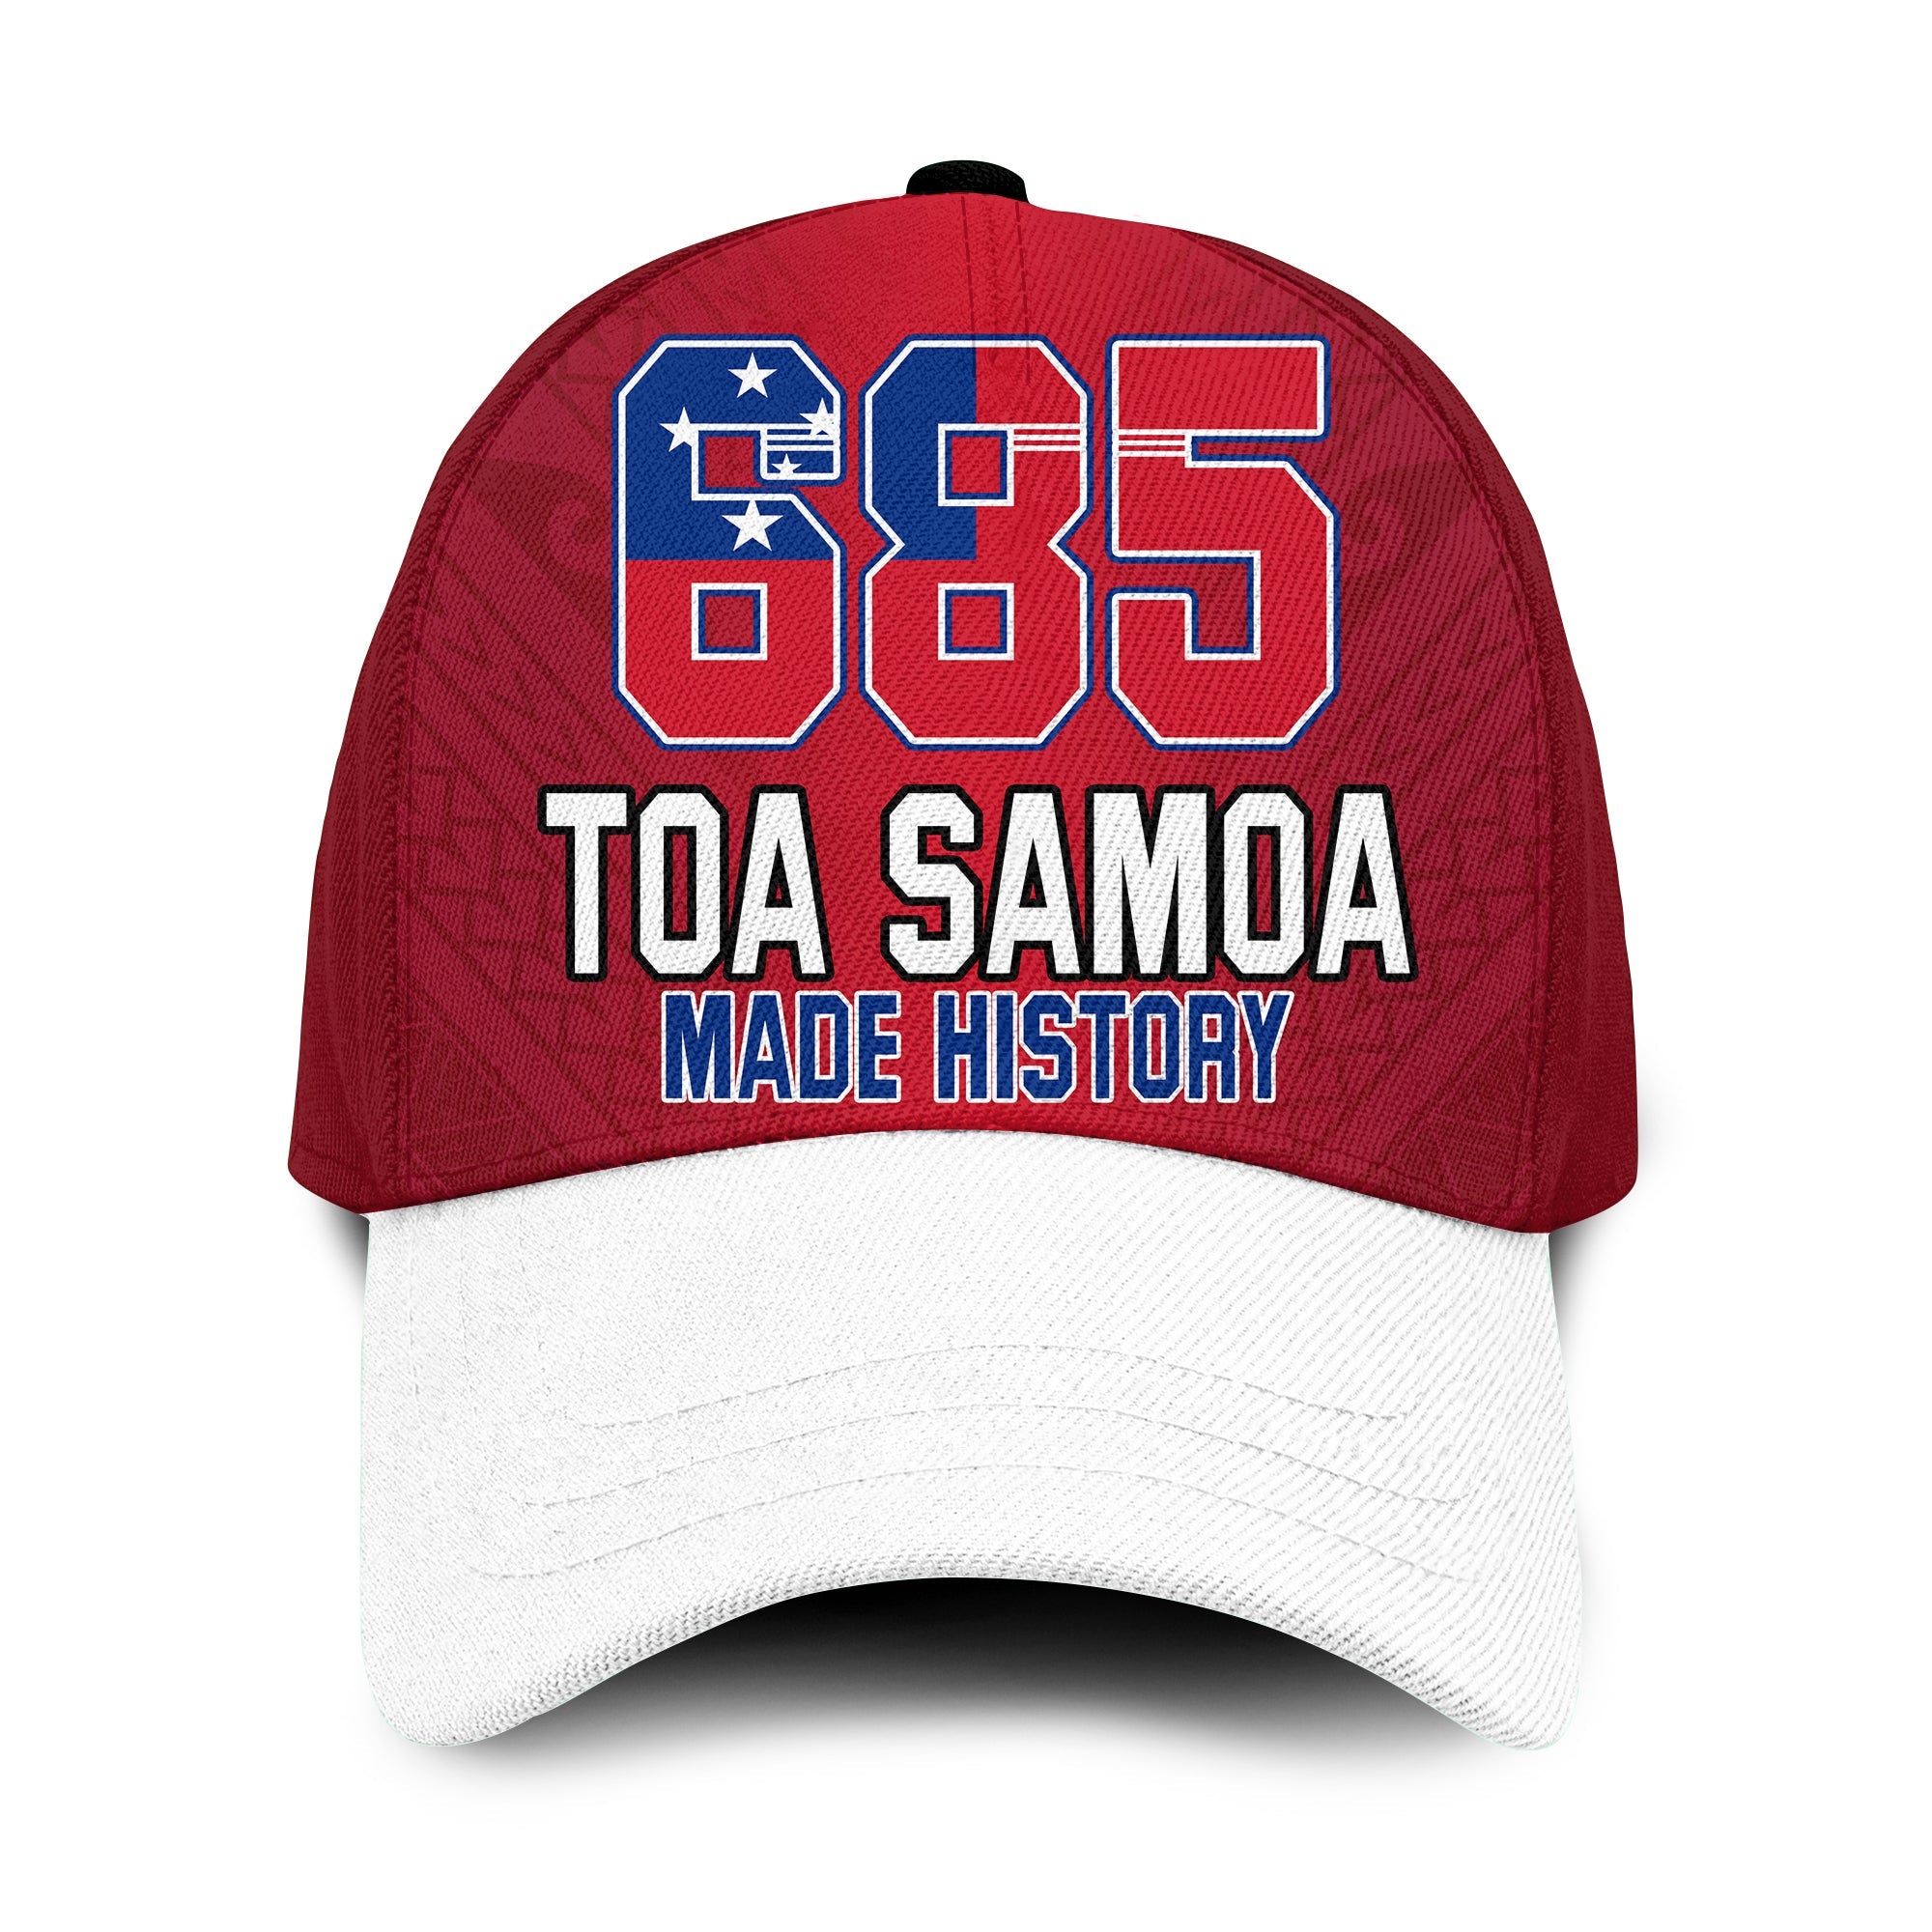 Toa Samoa Rugby Classic Cap Proud 685 Made History Red Ver.02 LT13 Classic Cap Universal Fit Red - Polynesian Pride